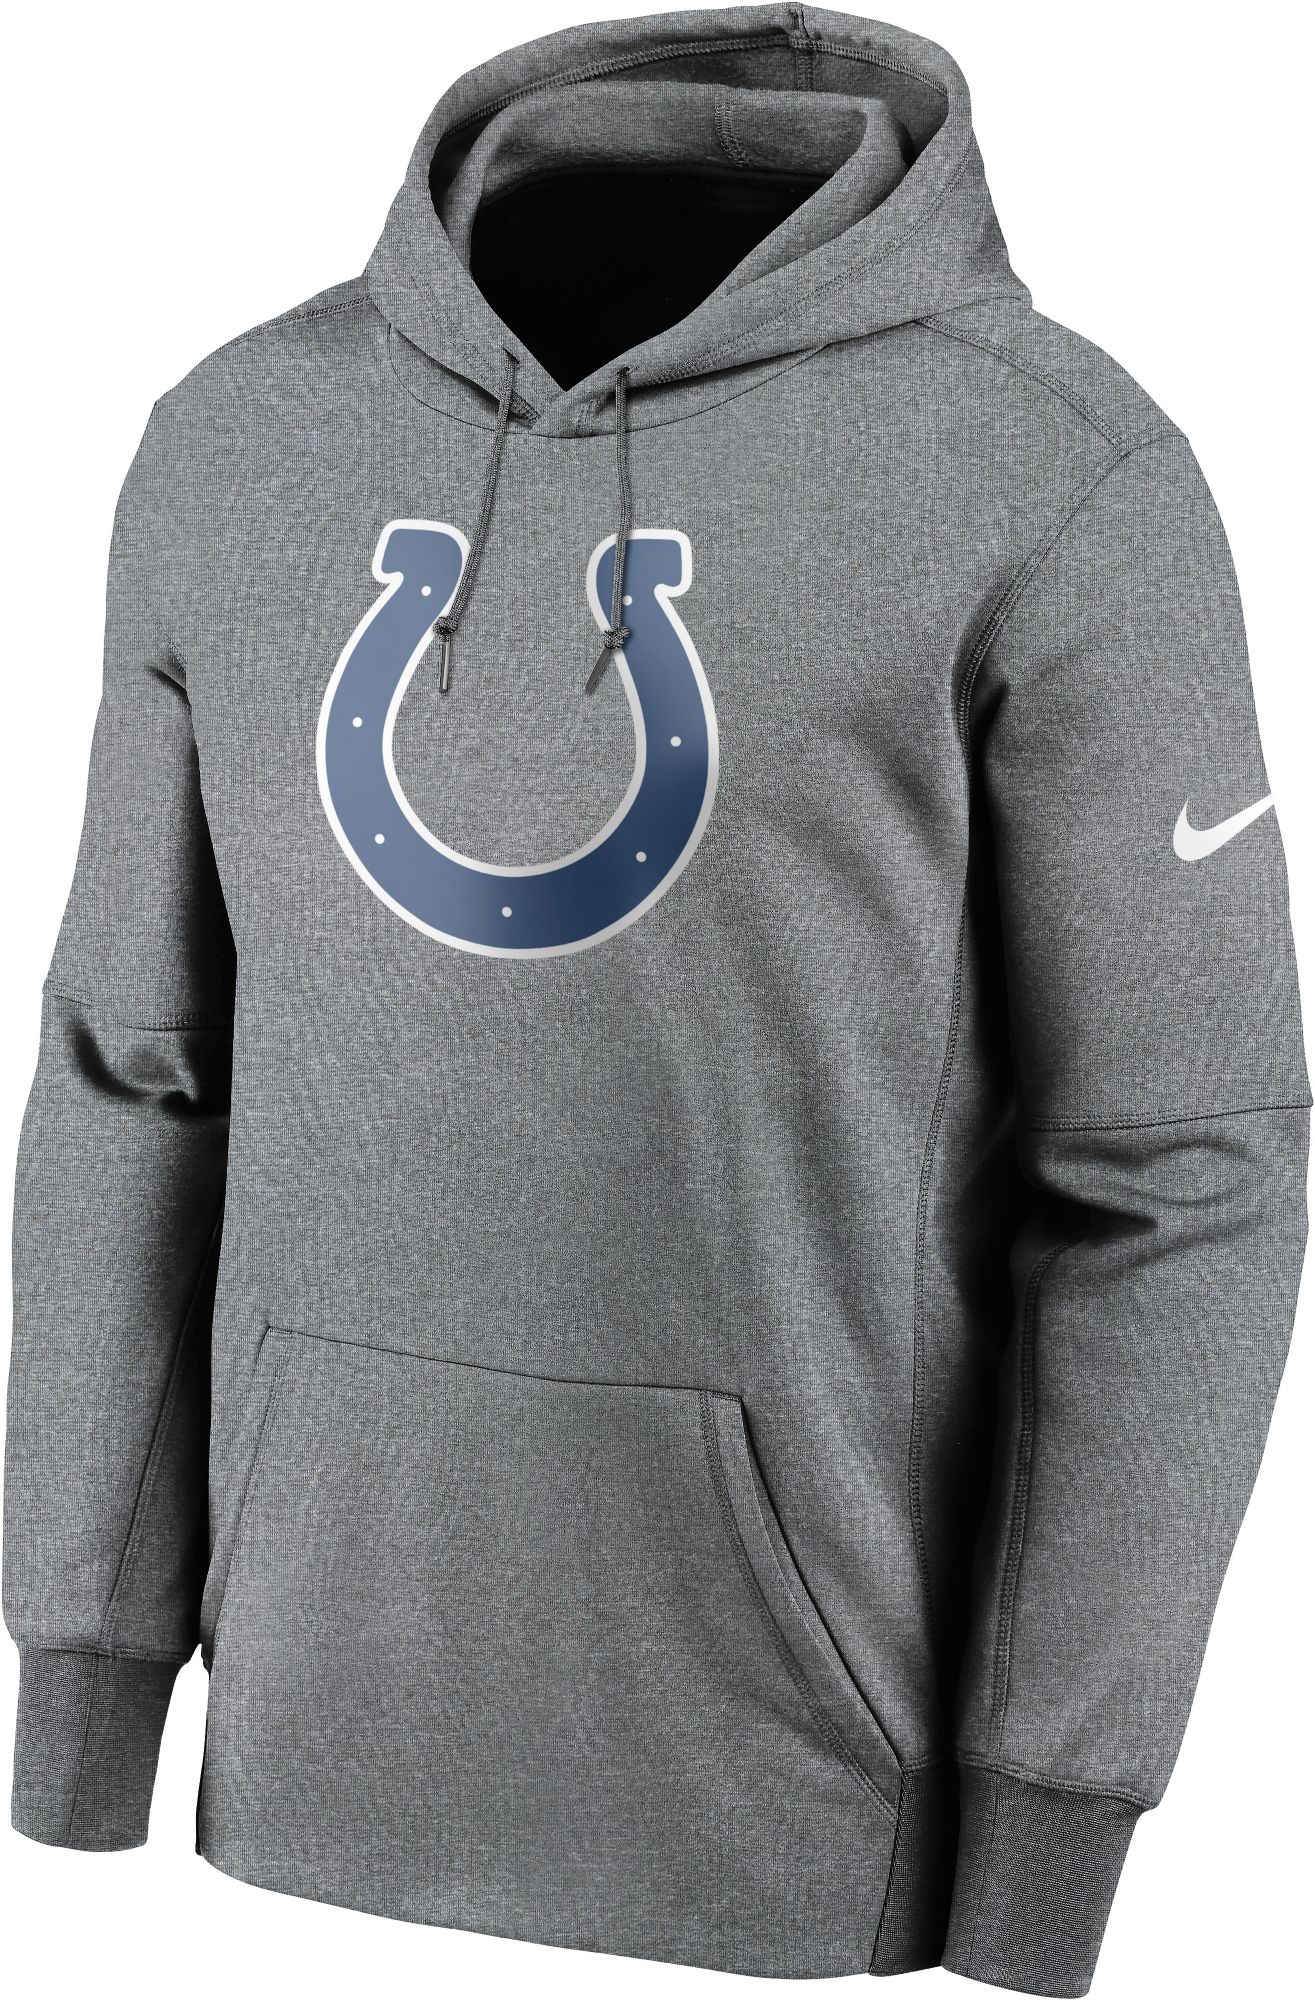 Indianapolis Colts Sideline Therma-FIT 